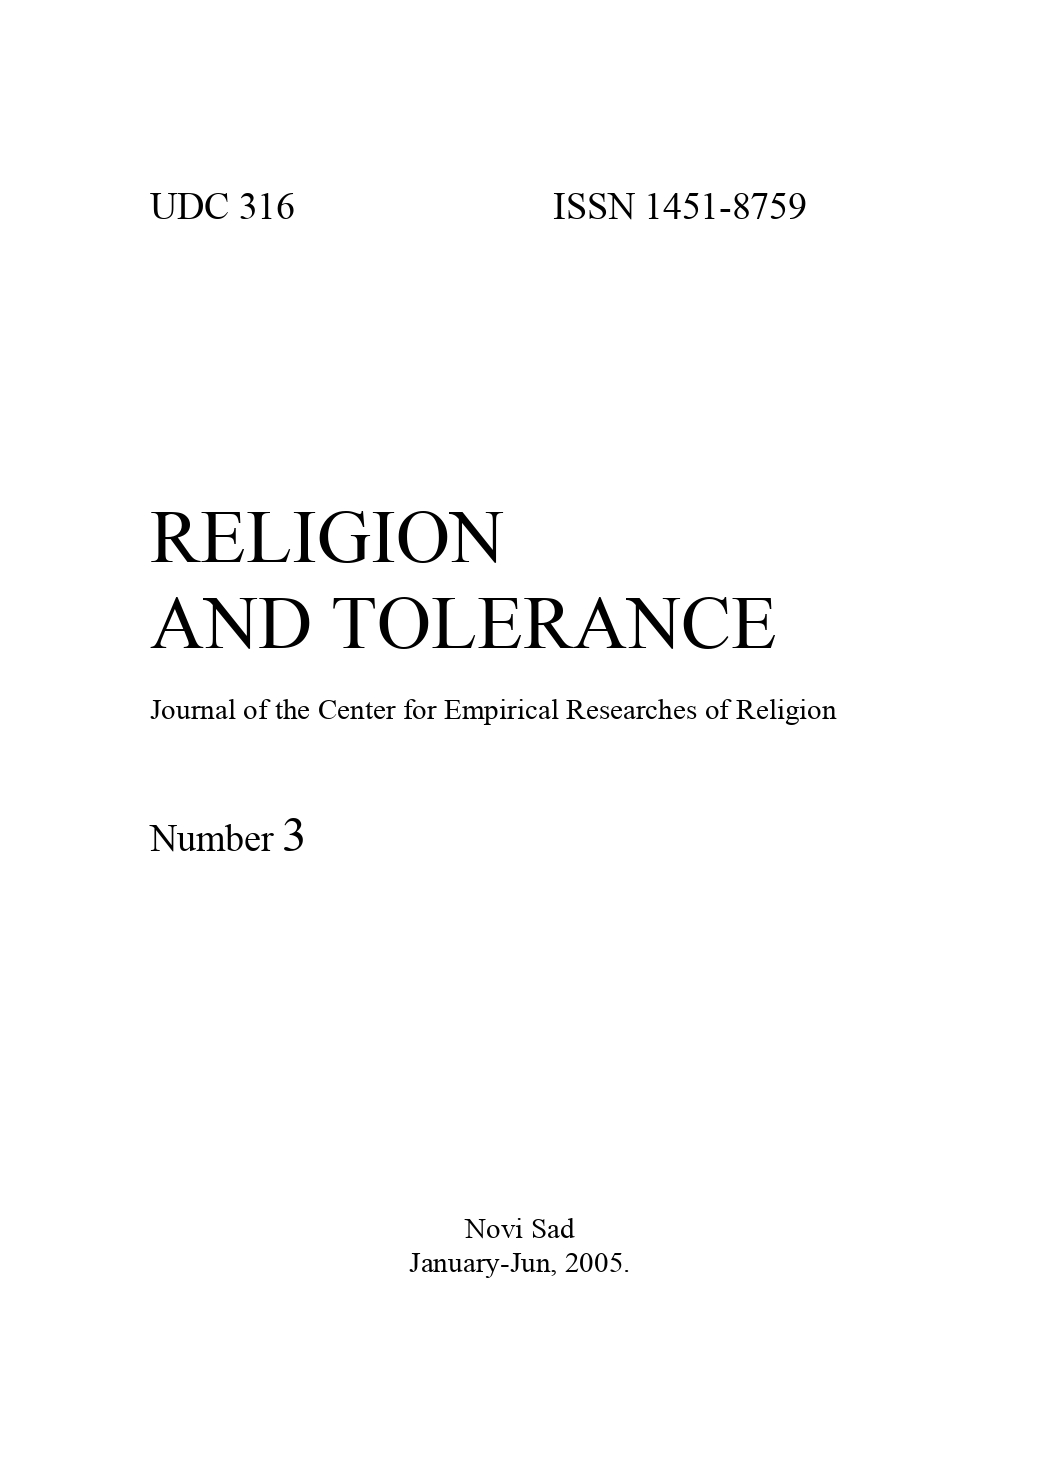 PROMOTION OF JOURNAL RELIGION AND TOLERANCE Cover Image